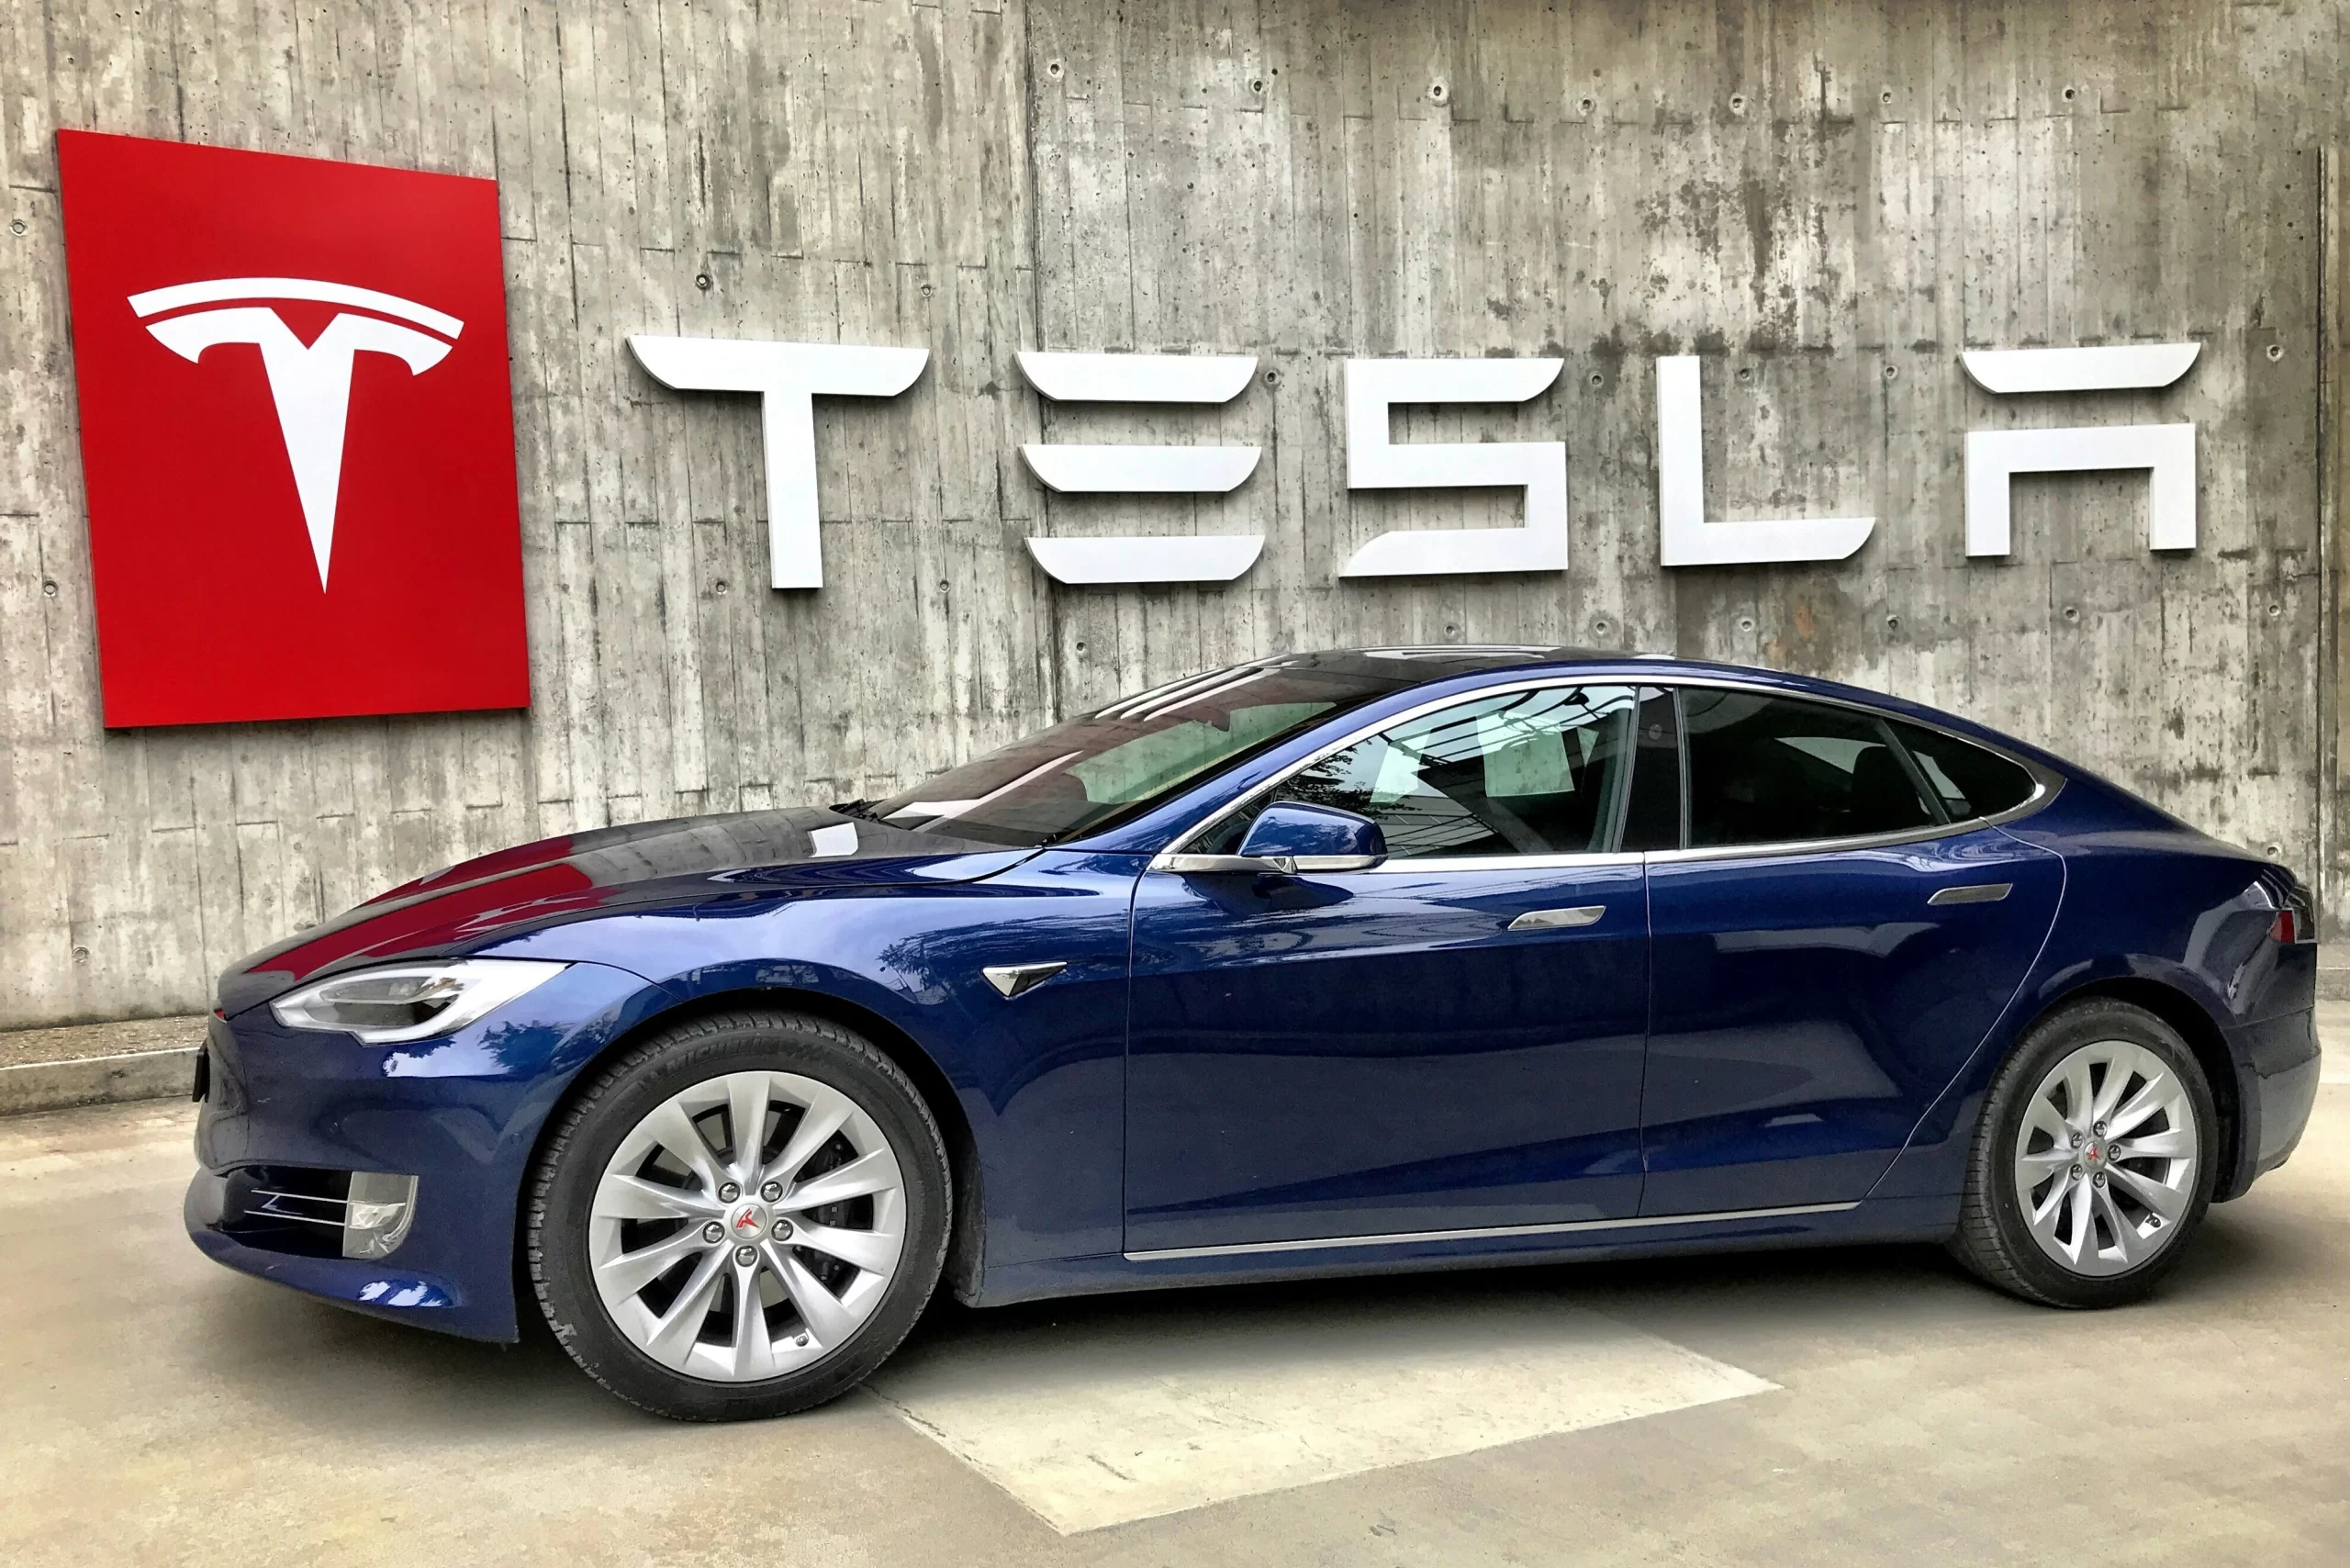 A sleek, blue Tesla car parked in a showroom, representing Elon Musk's innovative and environmentally-friendly personal brand image.